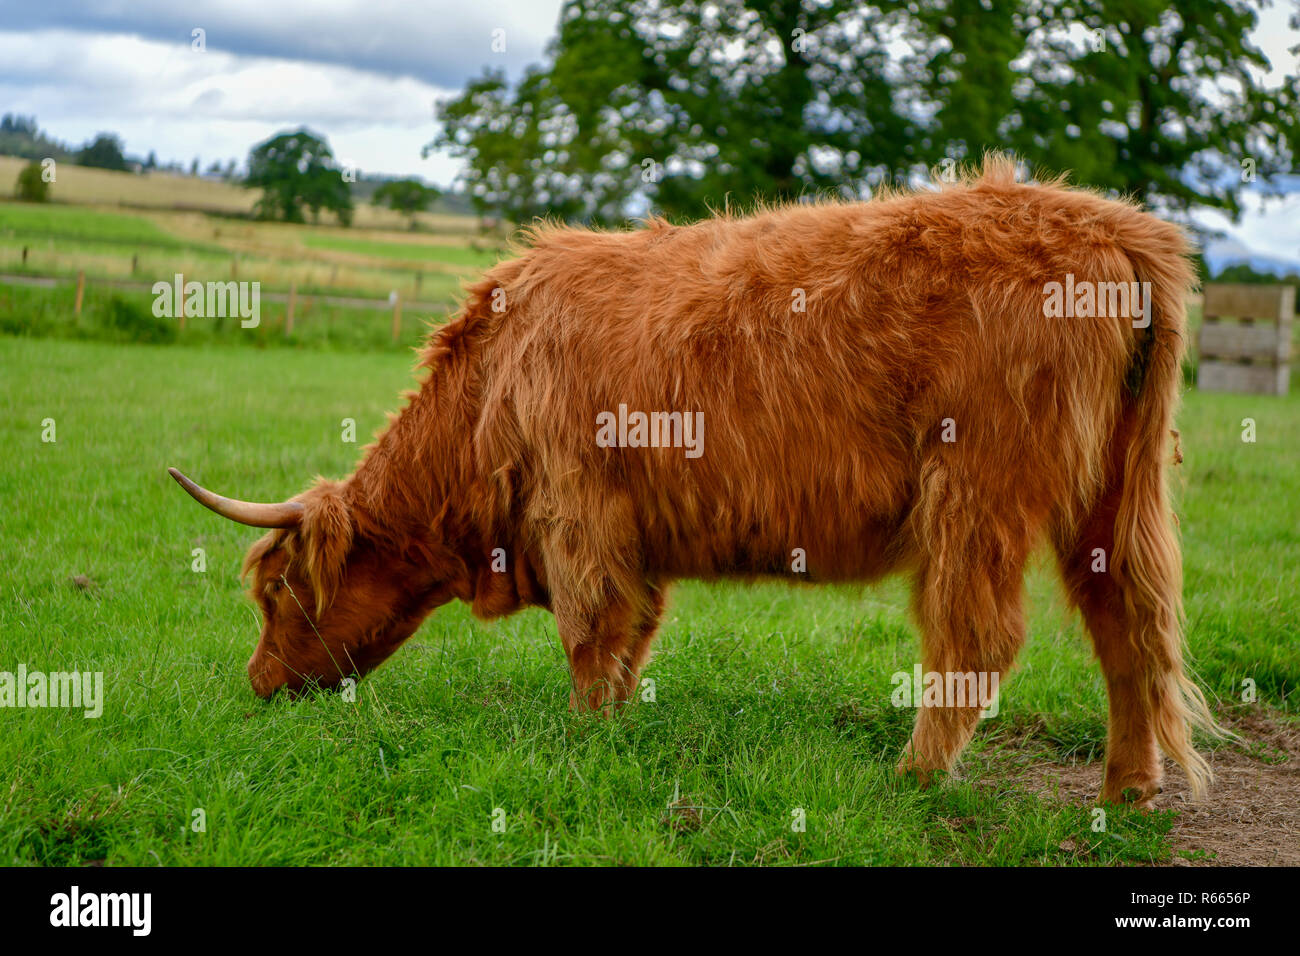 Scotland, village, animals on a farm, Scottish Highland Cattle cow with long hair, cat domestic animals mammals Stock Photo